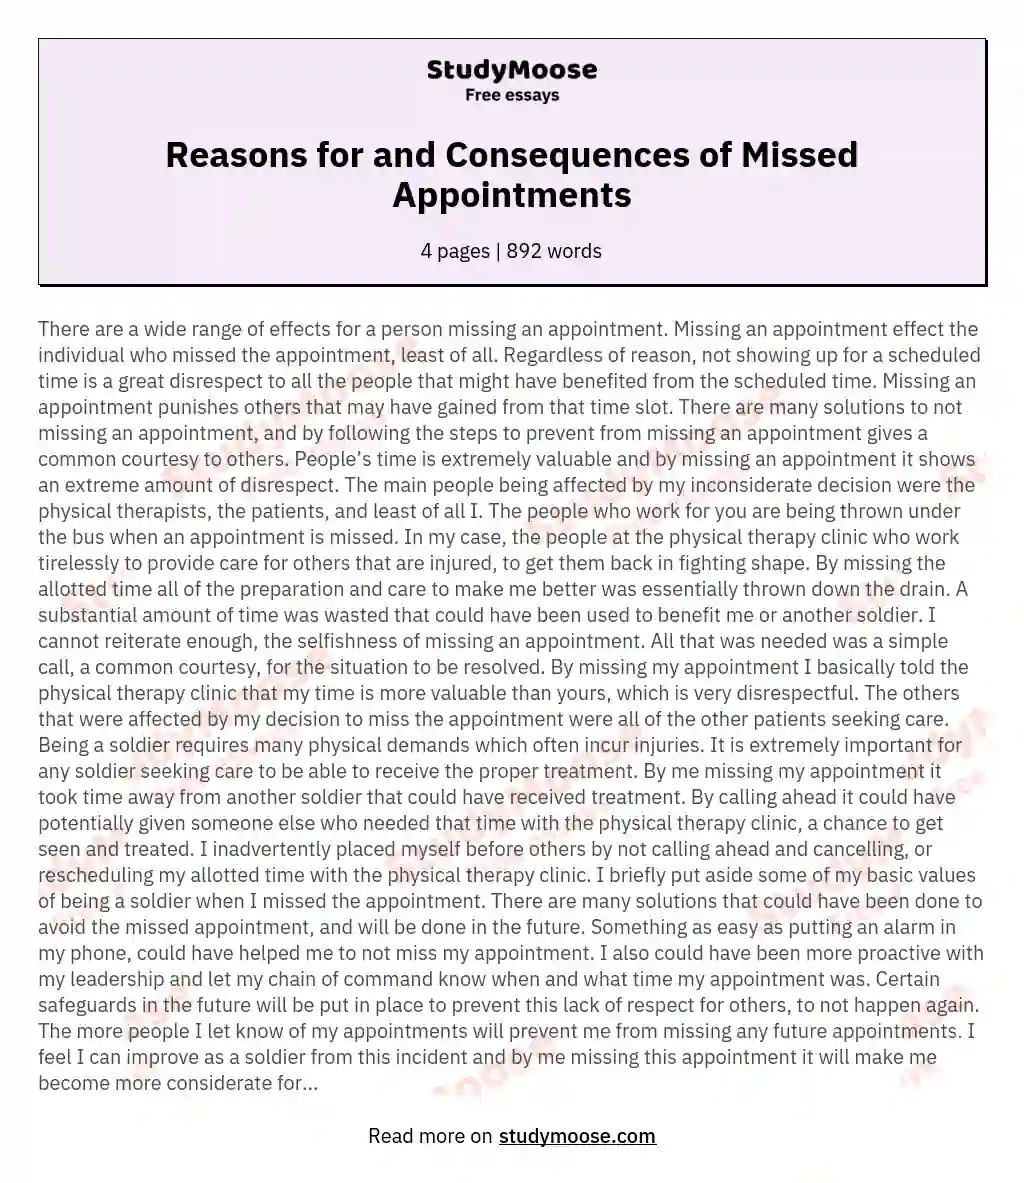 Reasons for and Consequences of Missed Appointments